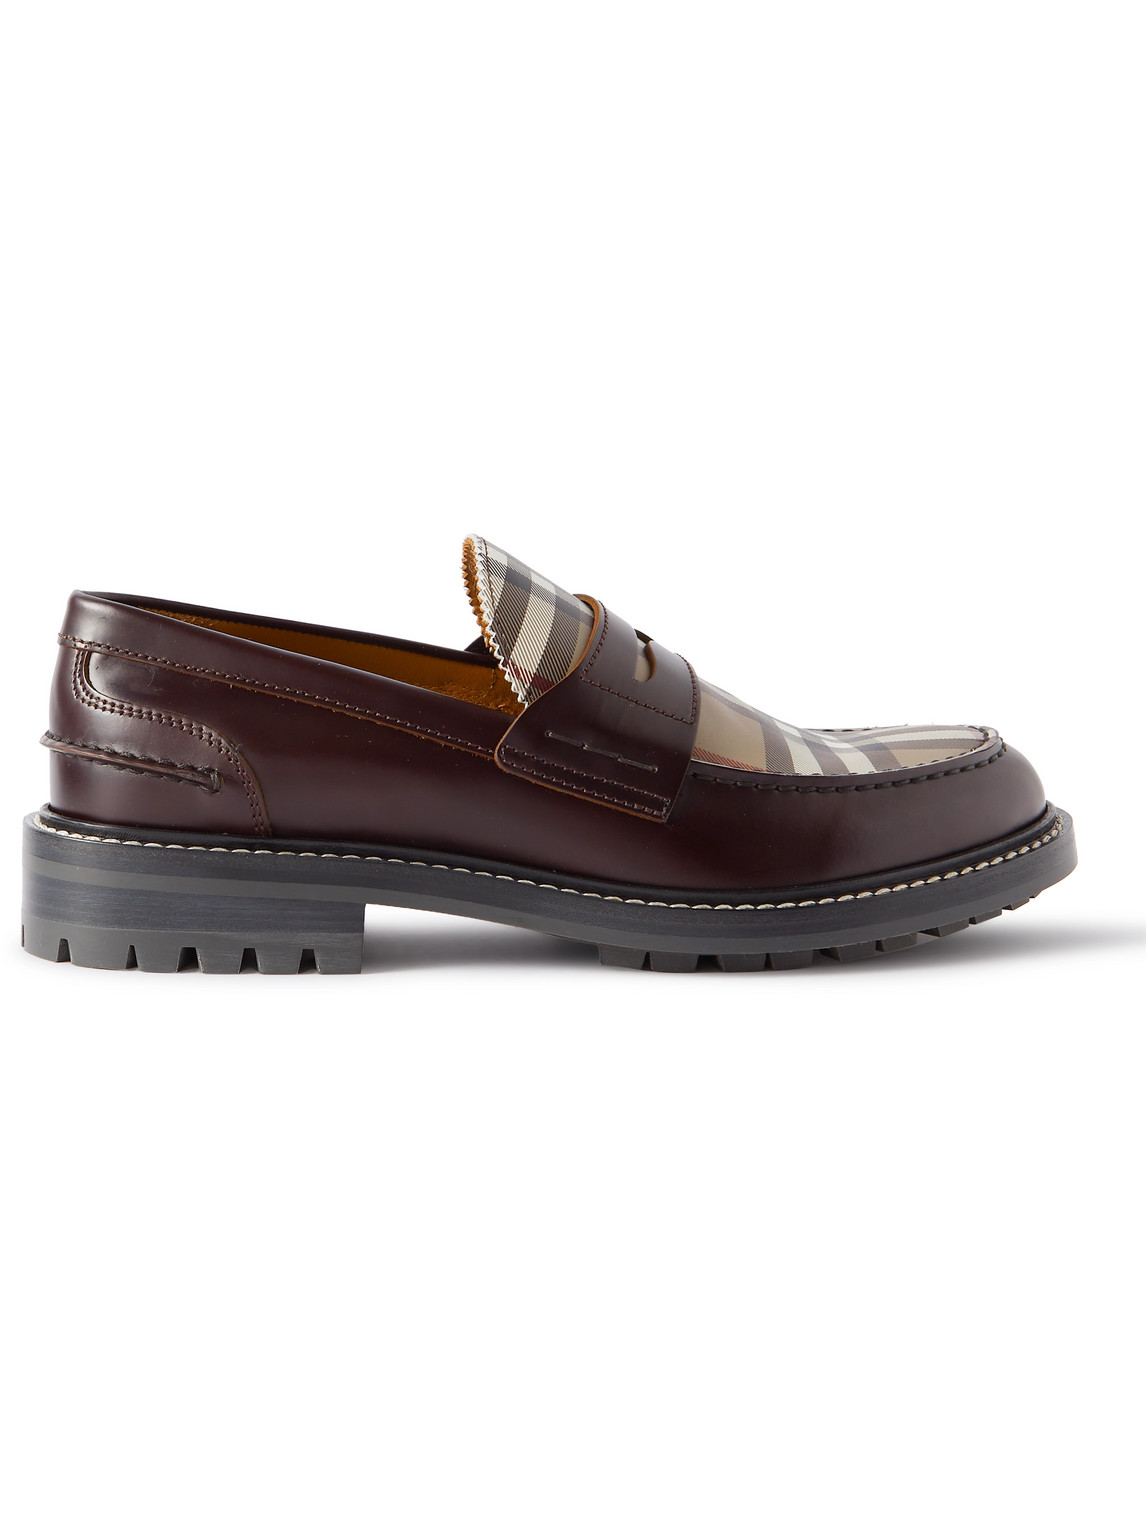 Burberry Checked Leather Penny Loafers In Brown